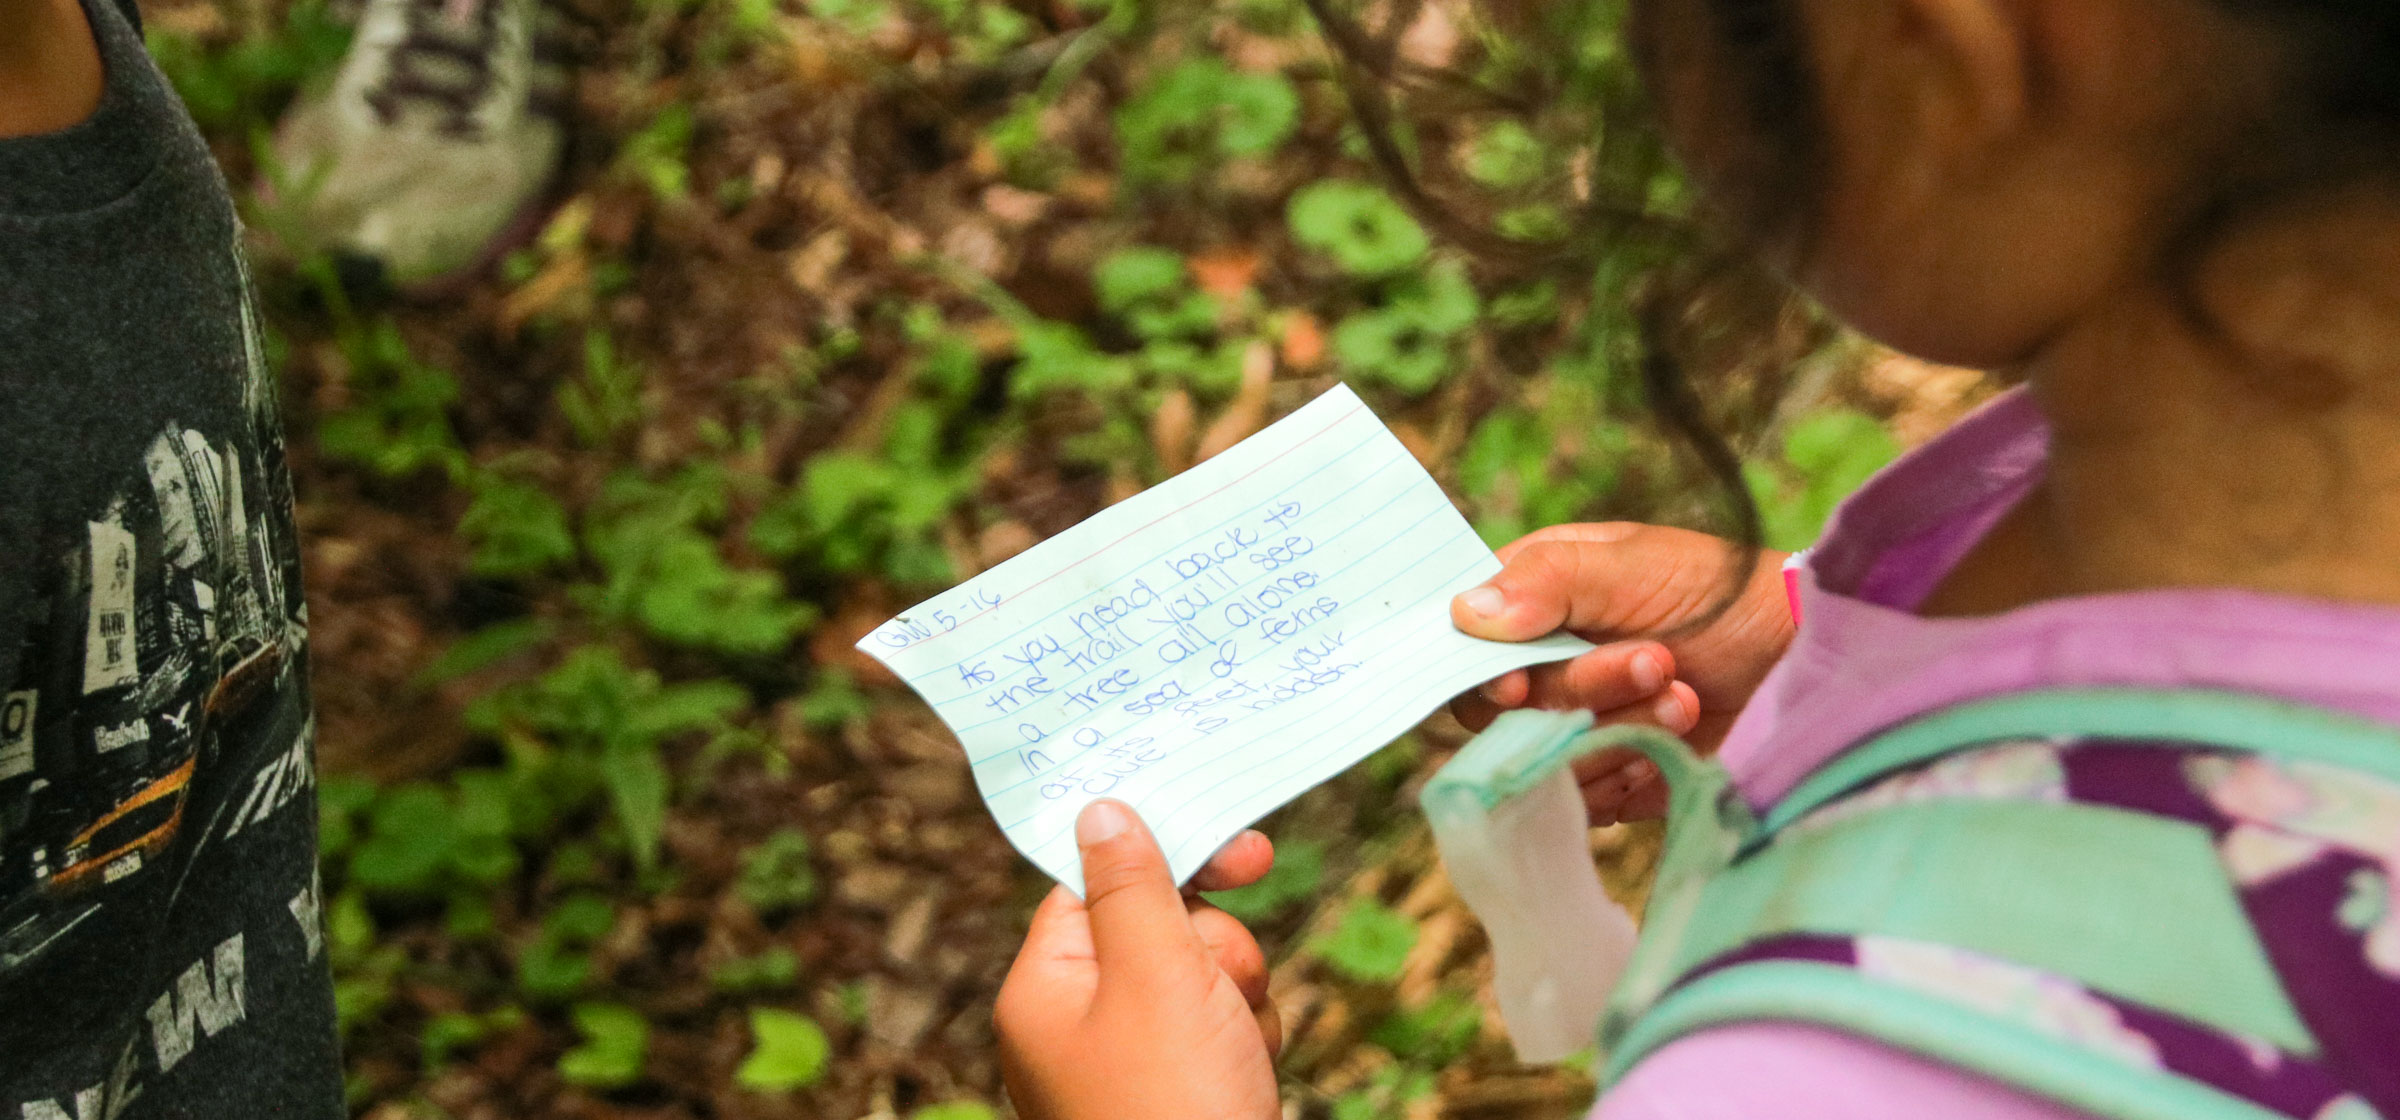 Young girl camper holding a notecard with a scavenger hunt clue